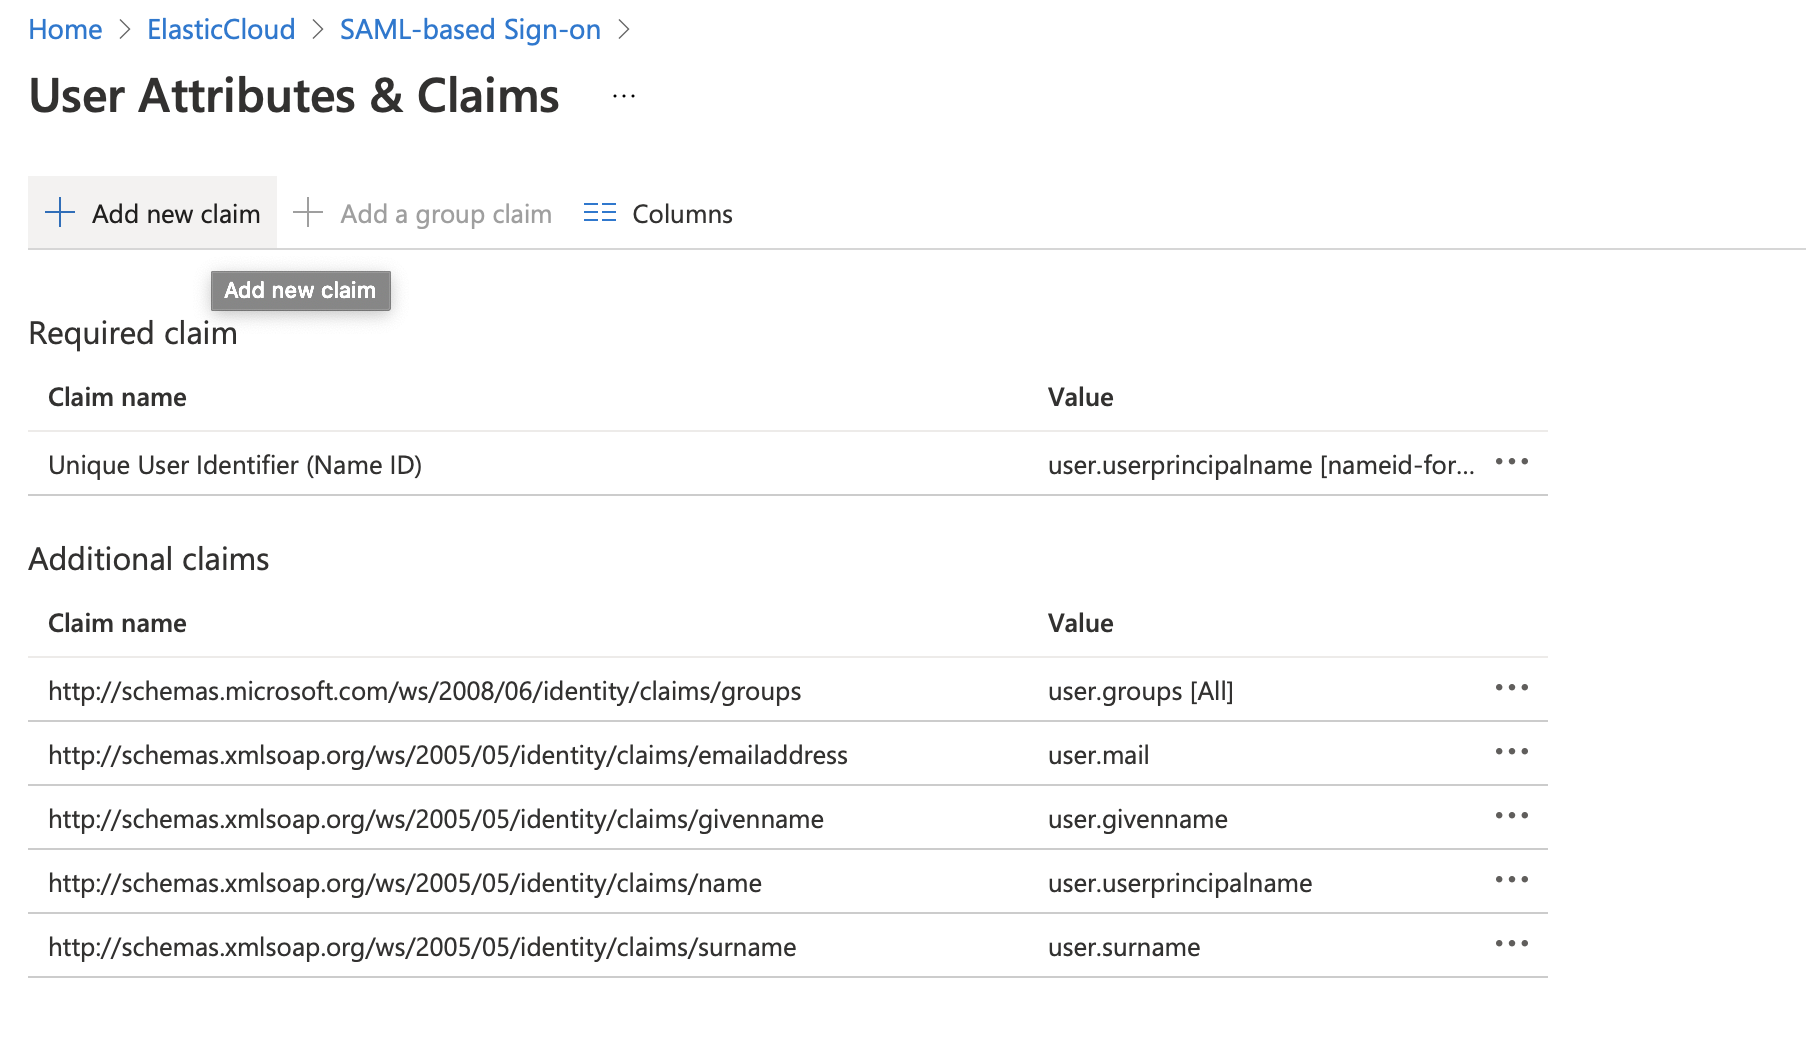 The Azure User Attributes & Claims page